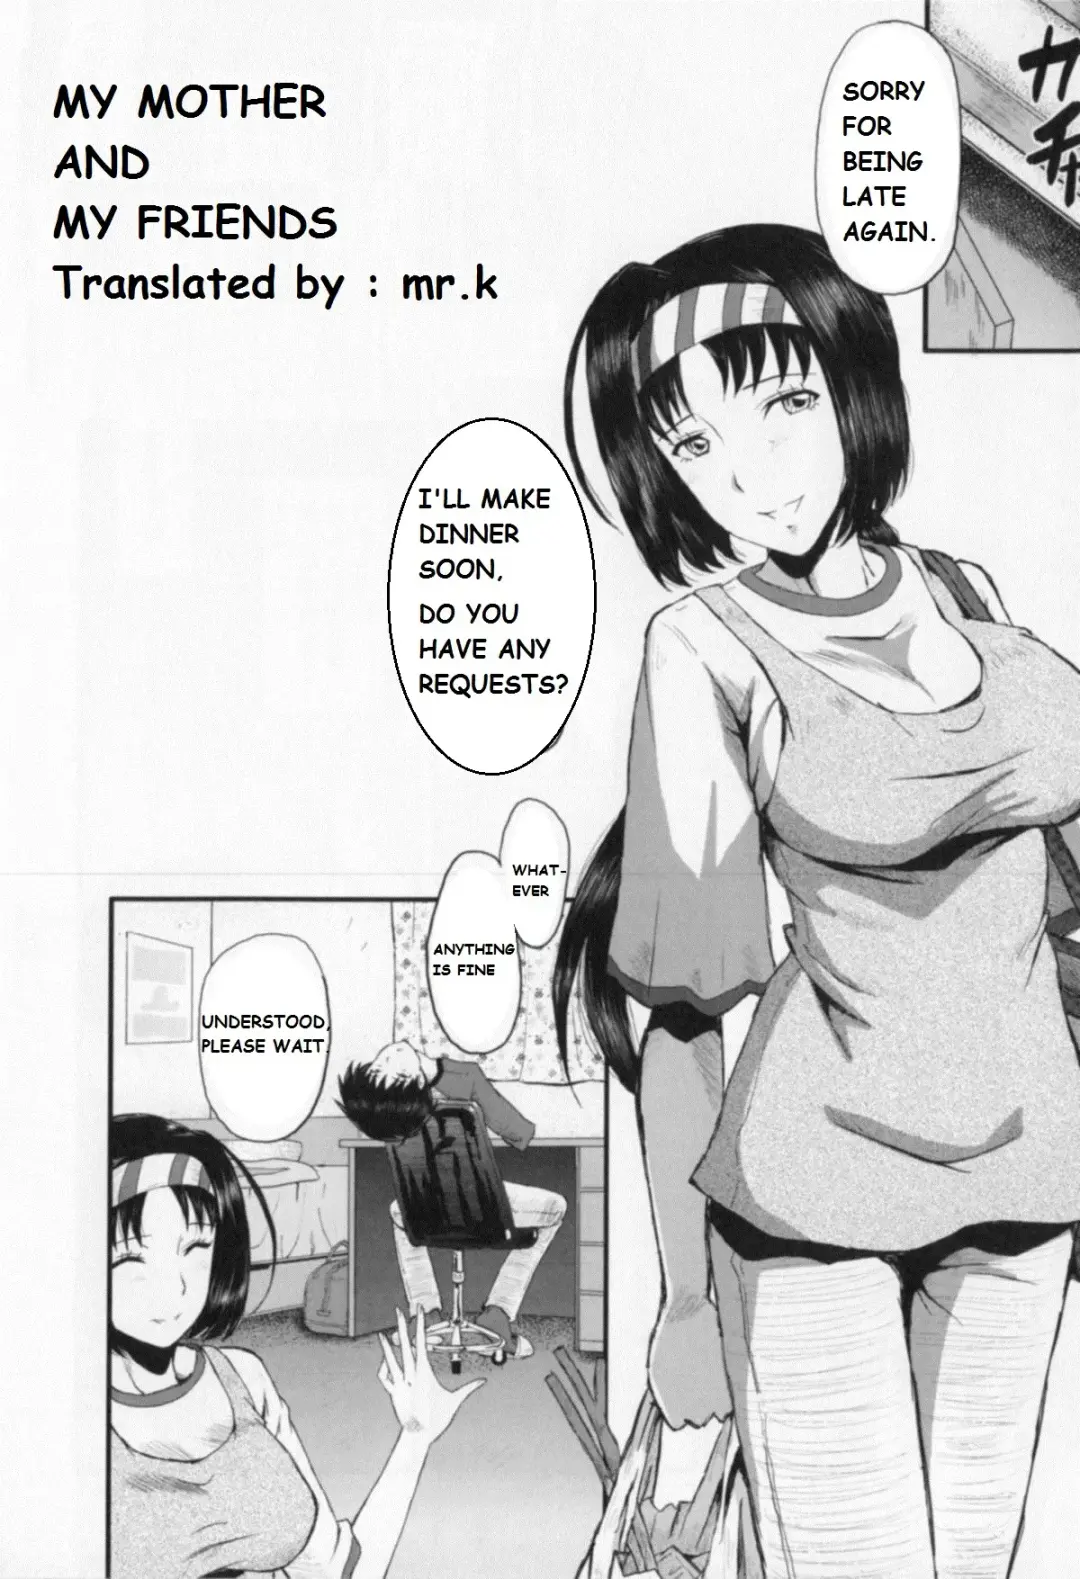 Read [Sink] My Mother And My Friends - Fhentai.net